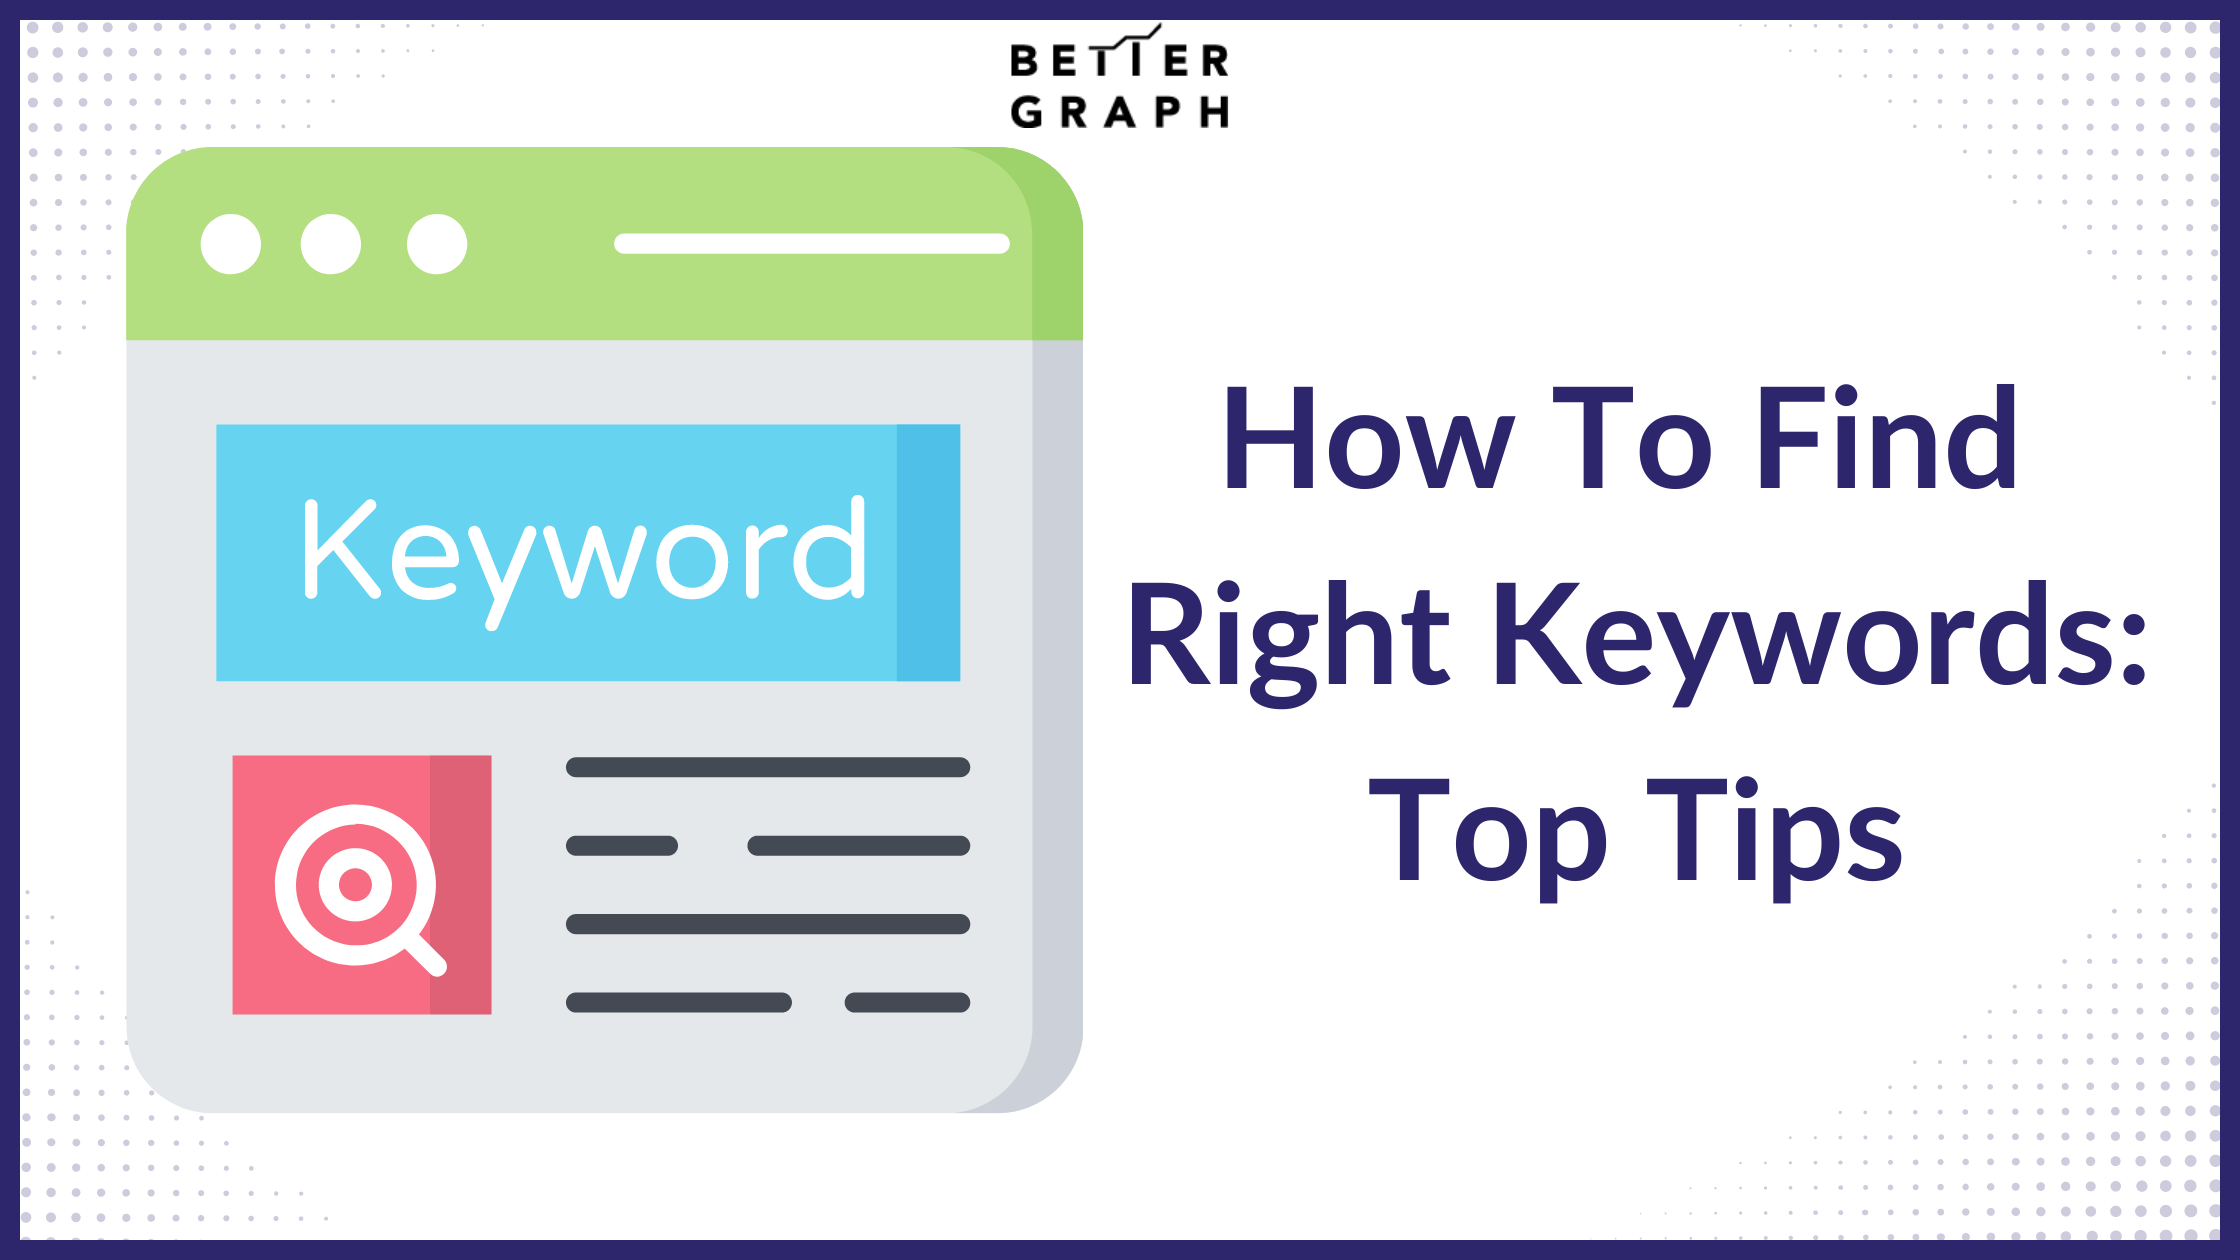 How To Find Right Keywords Top Tips (1).png  by BetterGraph